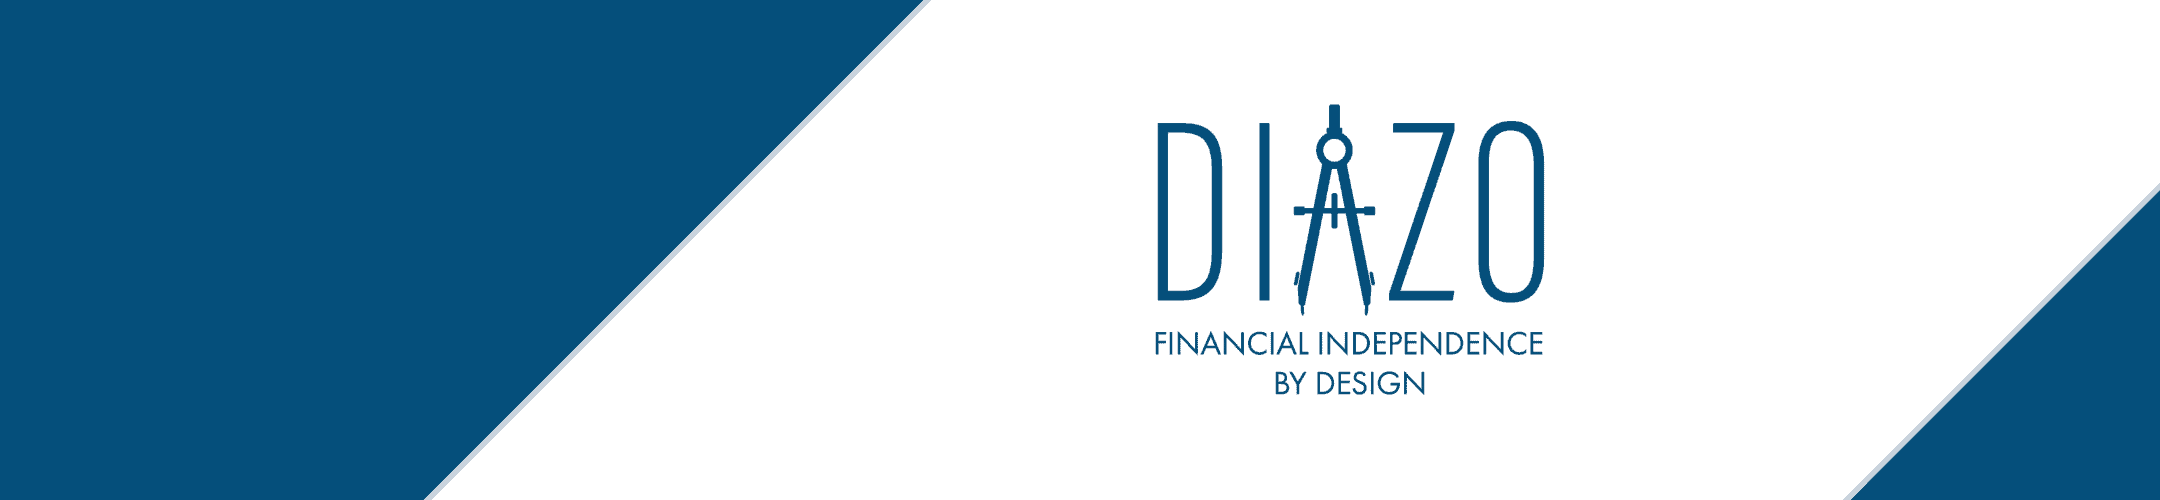 Diazo: achieve financial independence with strategic design - your pathway to economic freedom starts here.